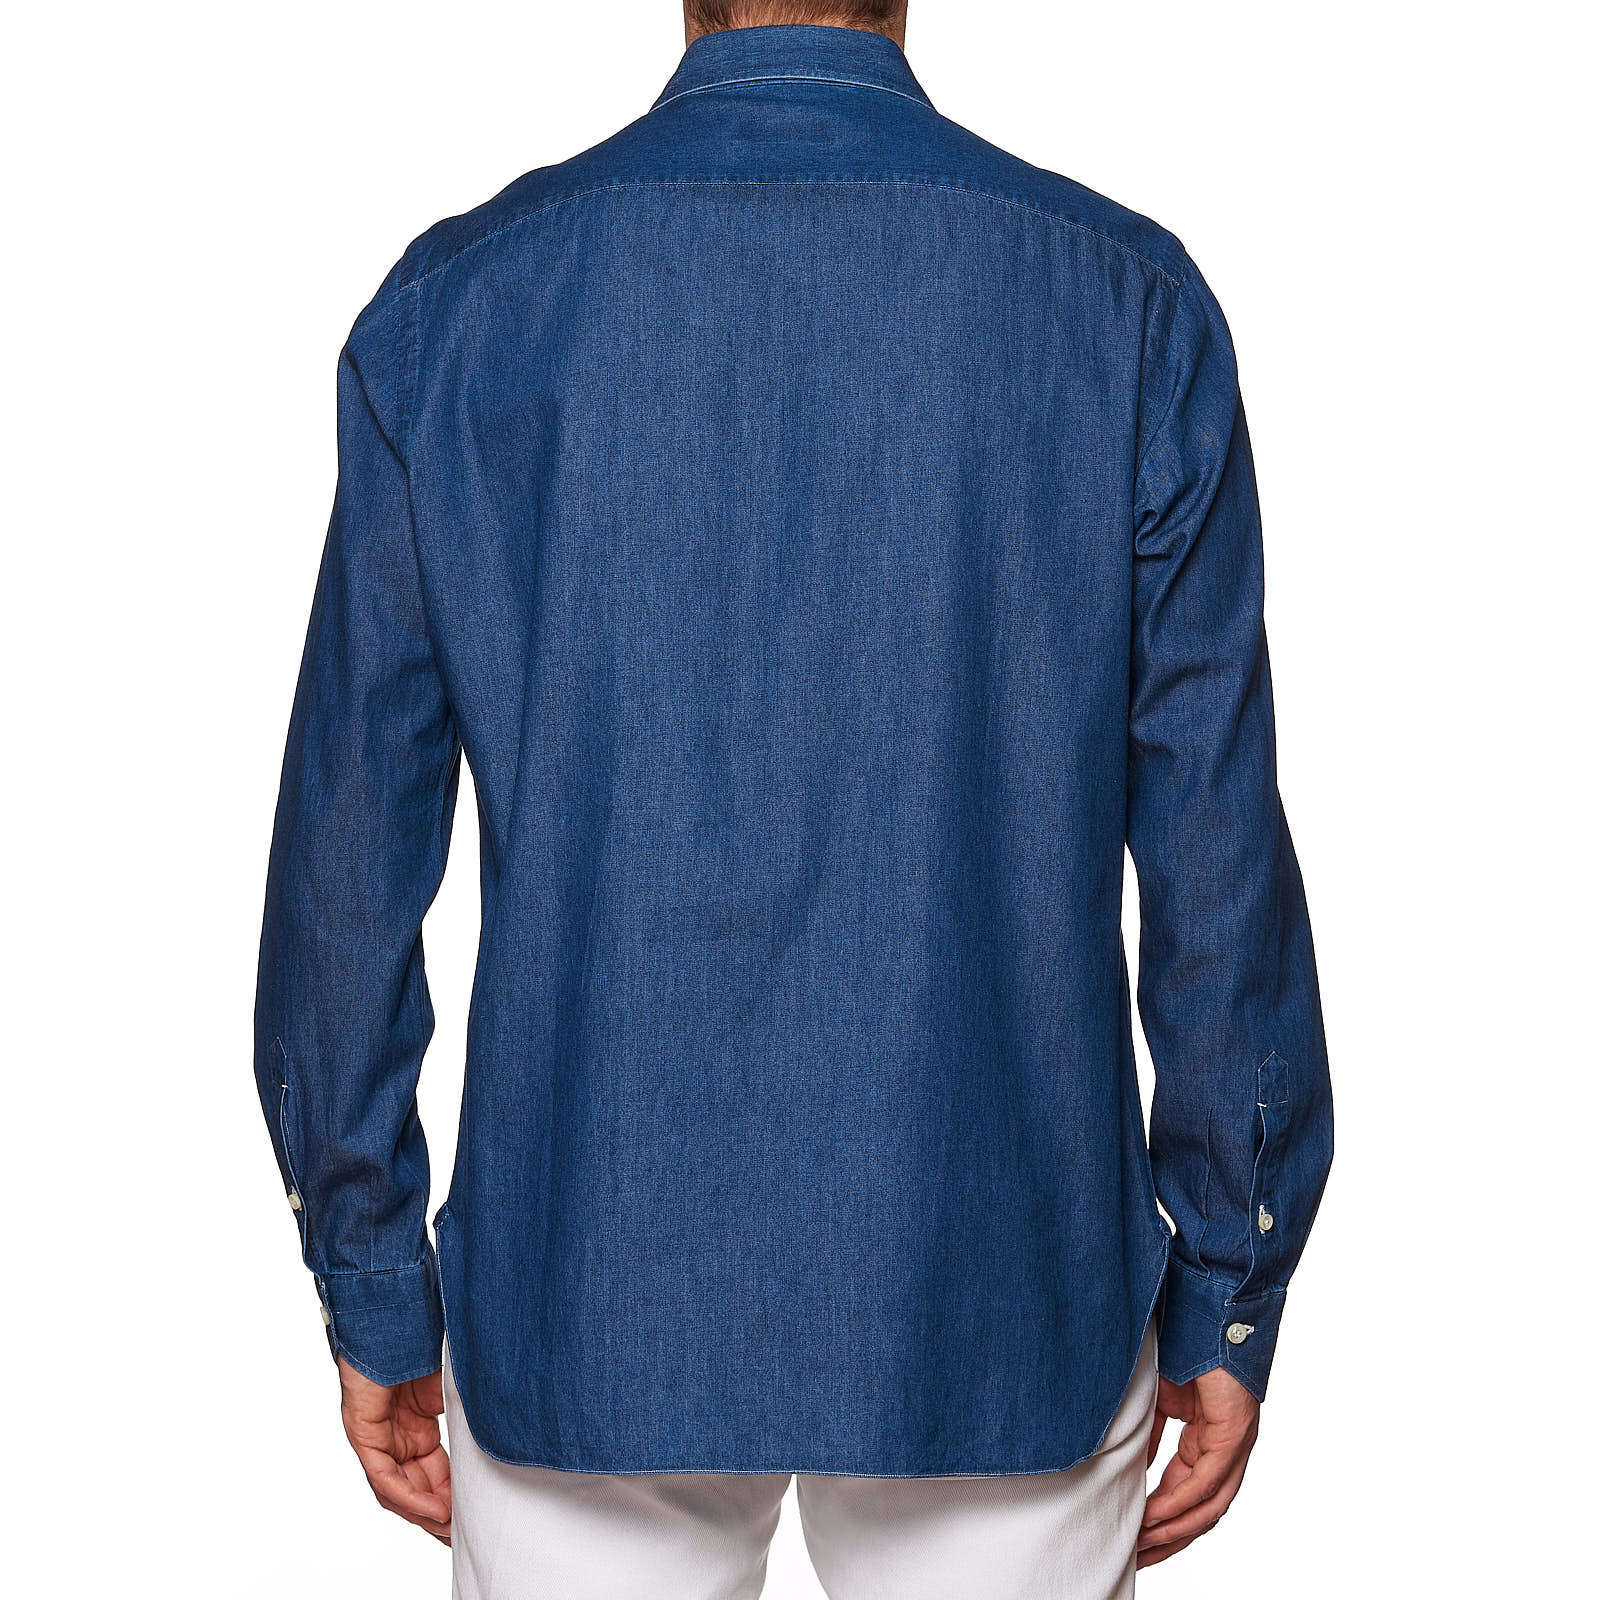 Rhysley Men's Blue Regular Fit Denim Casual Shirt with Spread Collar & Full  Sleeves : Amazon.in: Clothing & Accessories